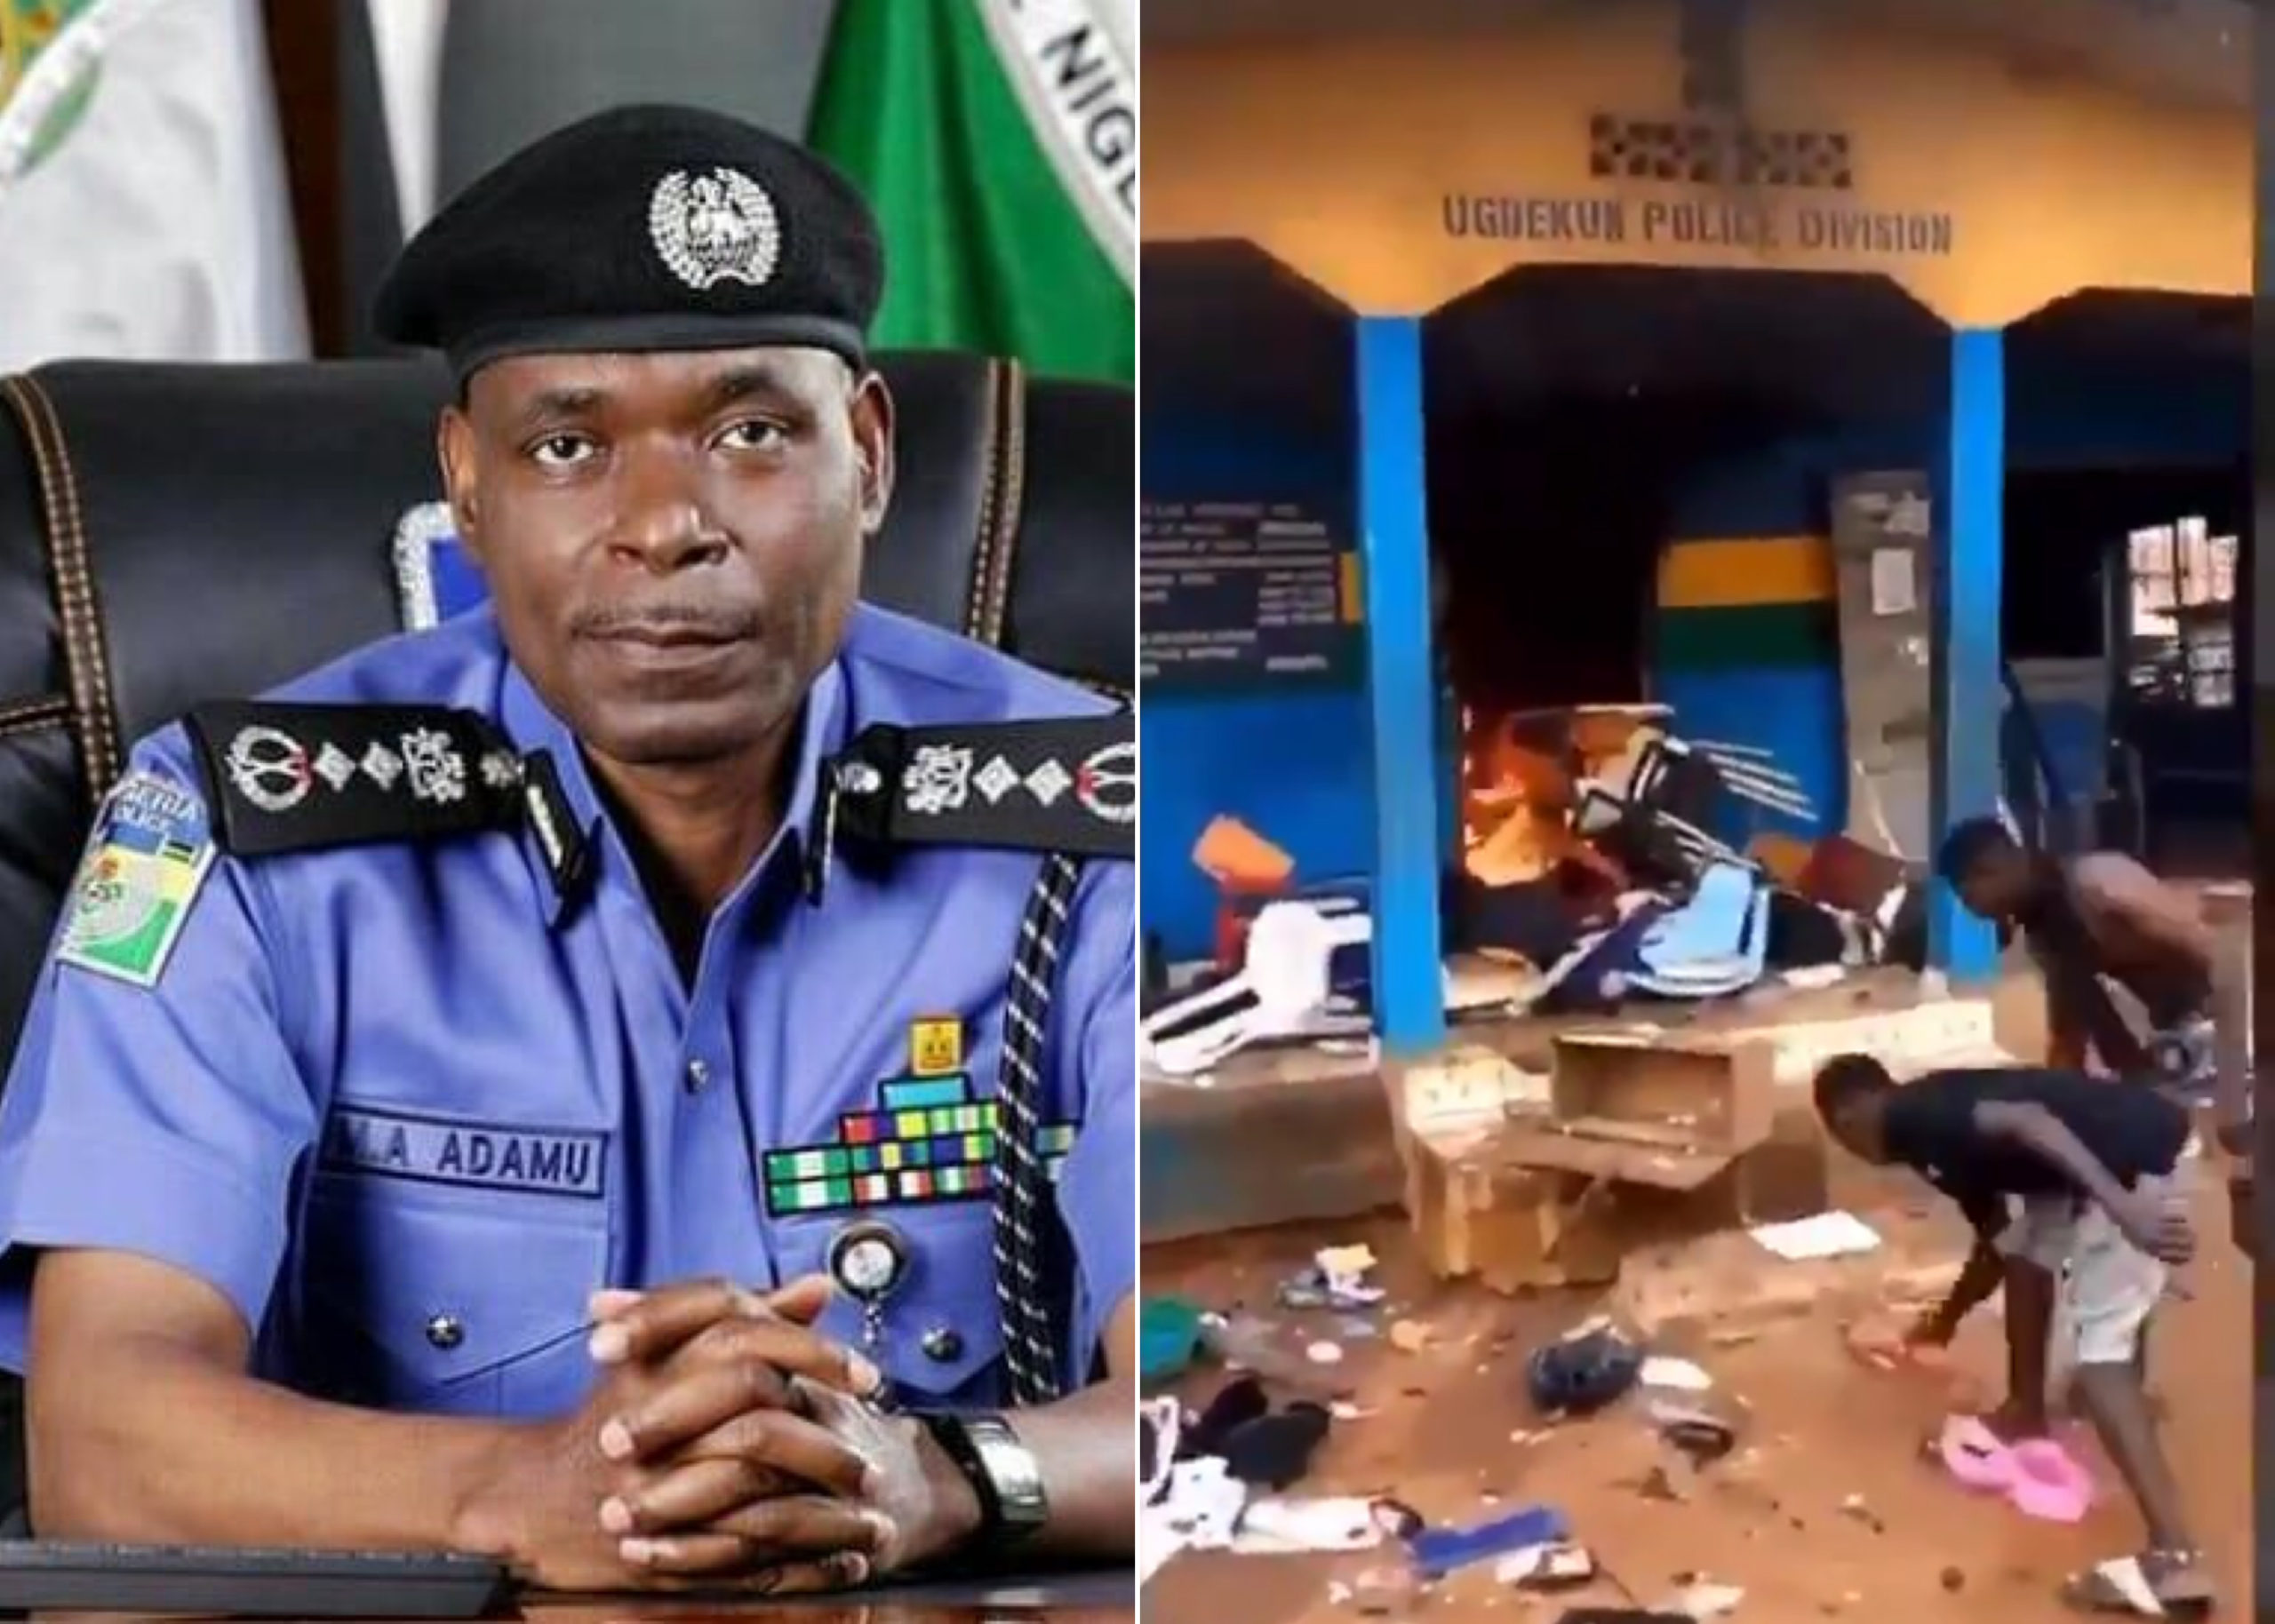 Three Stations Attacked By Persons Posing As #EndSARS Protesters - Police